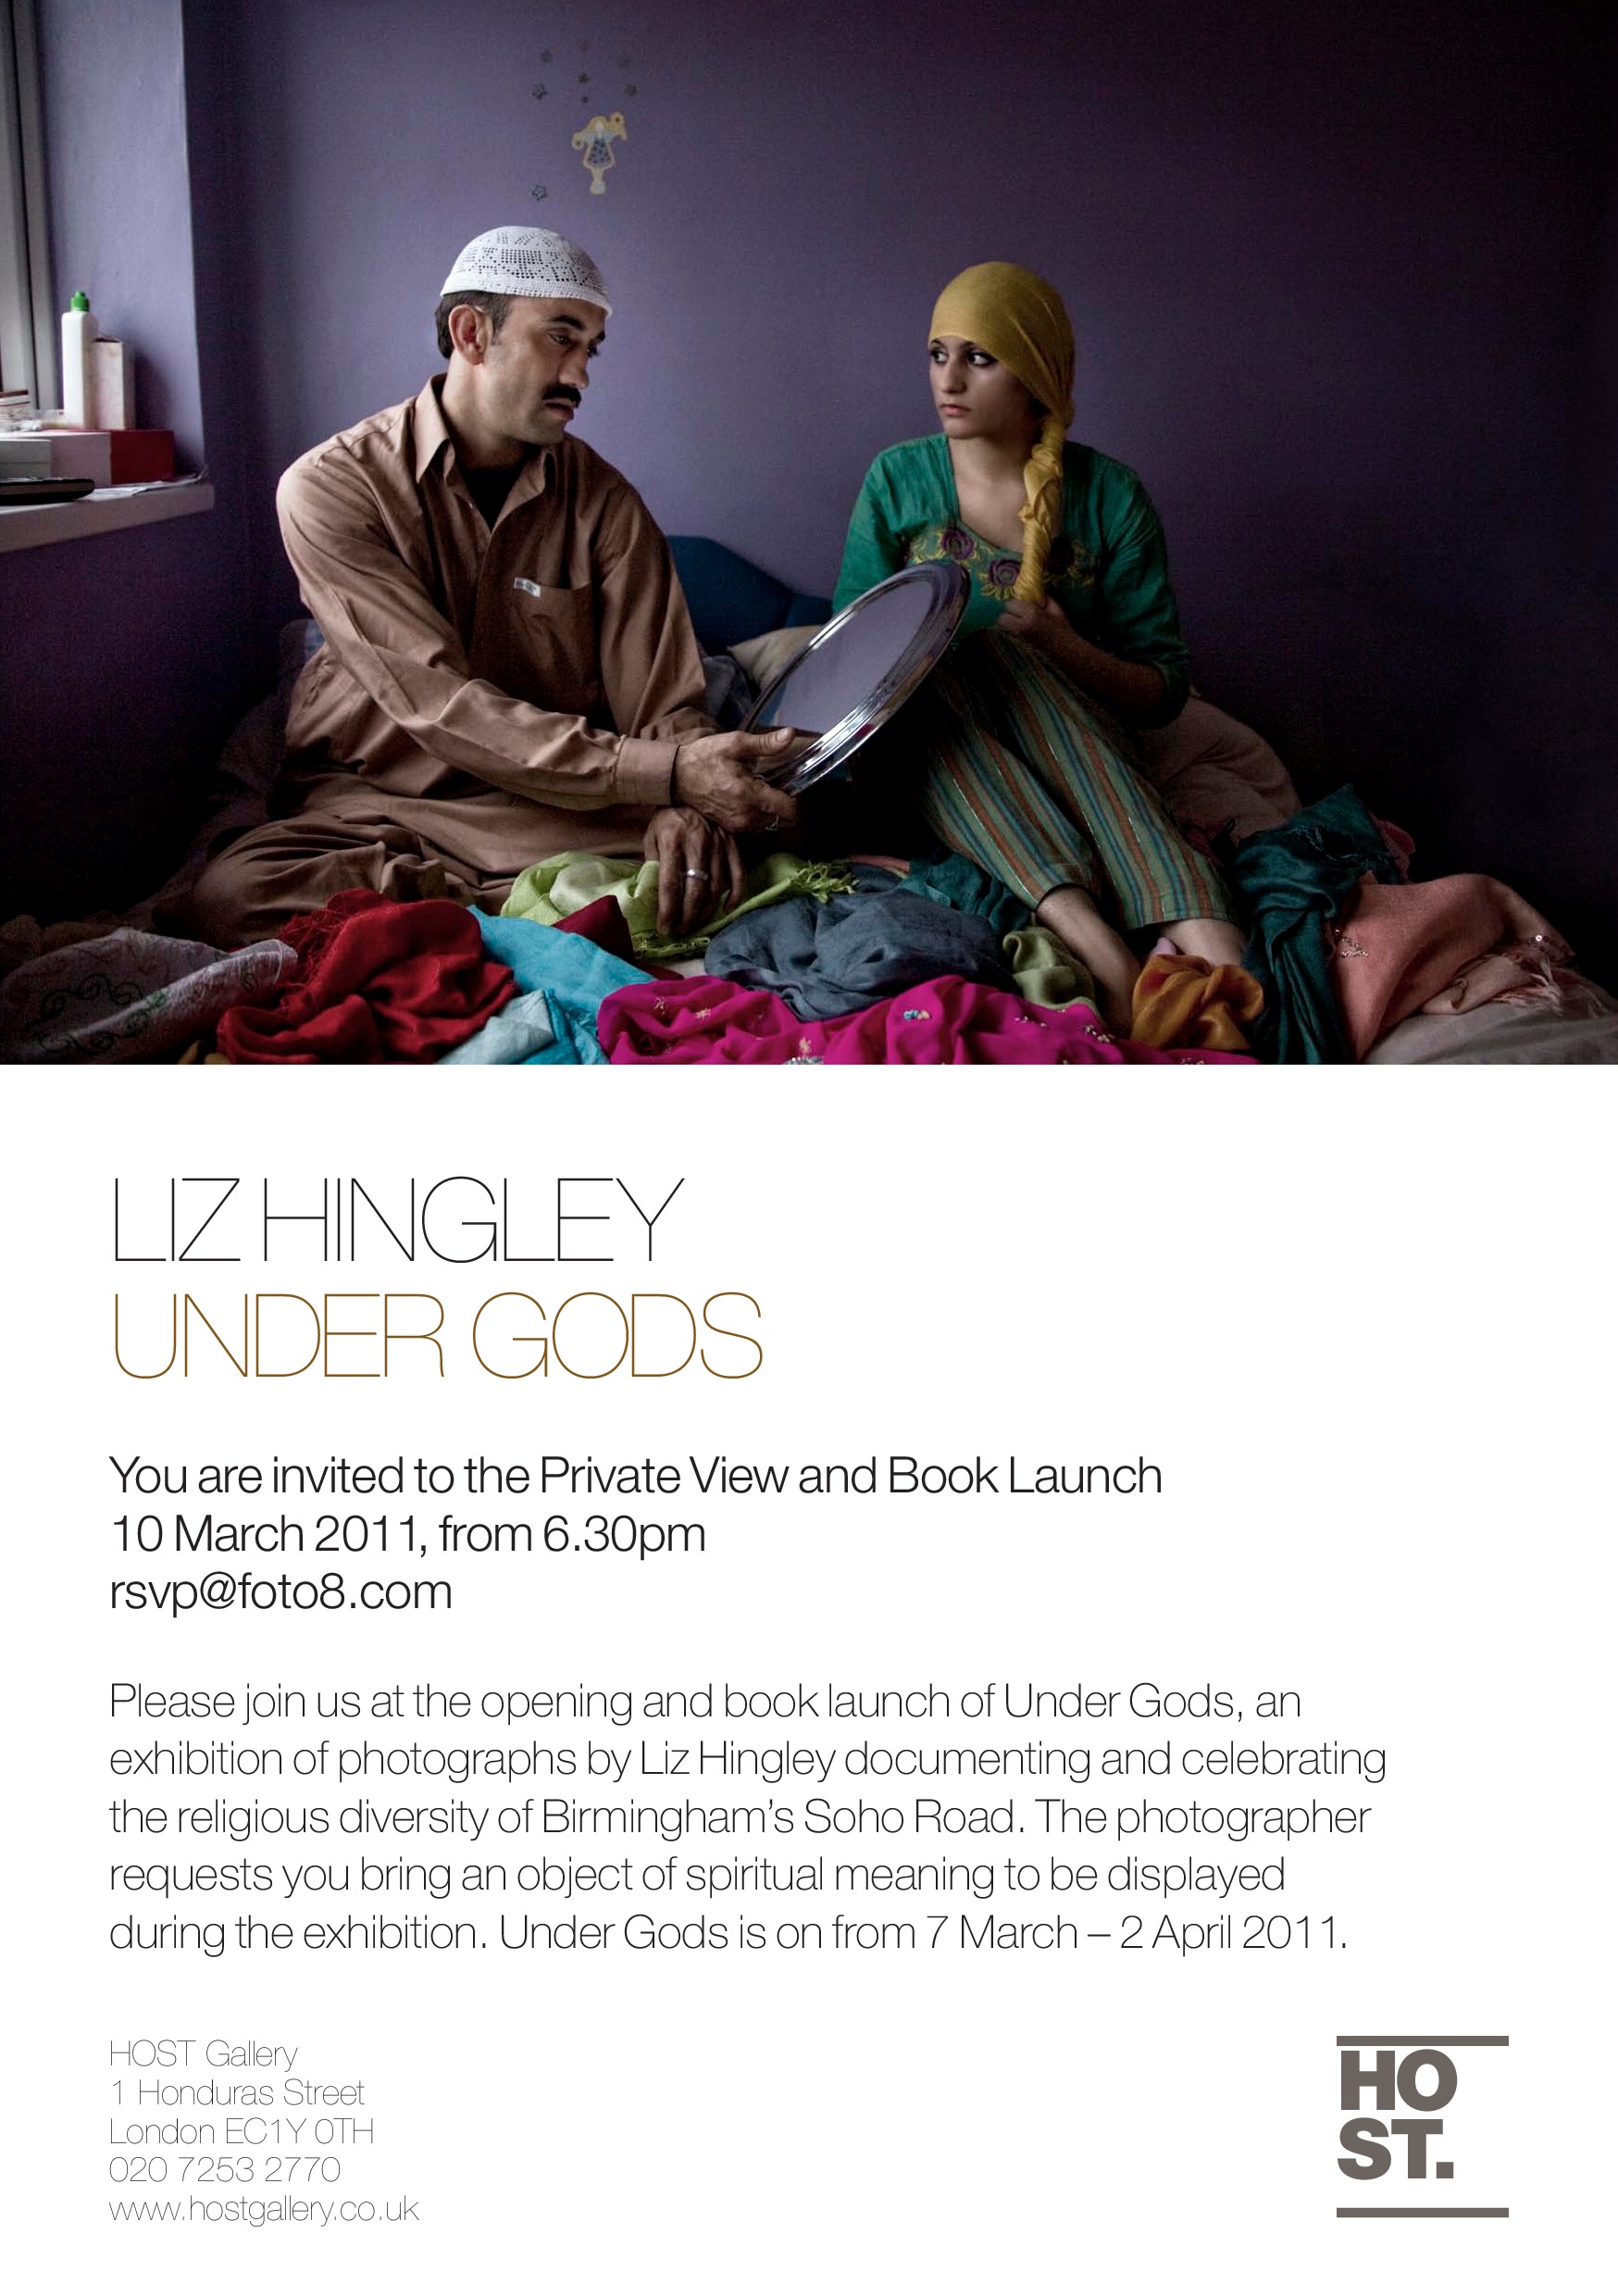 Invite for exhibition opening and book launch at Host Gallery, London, 2011